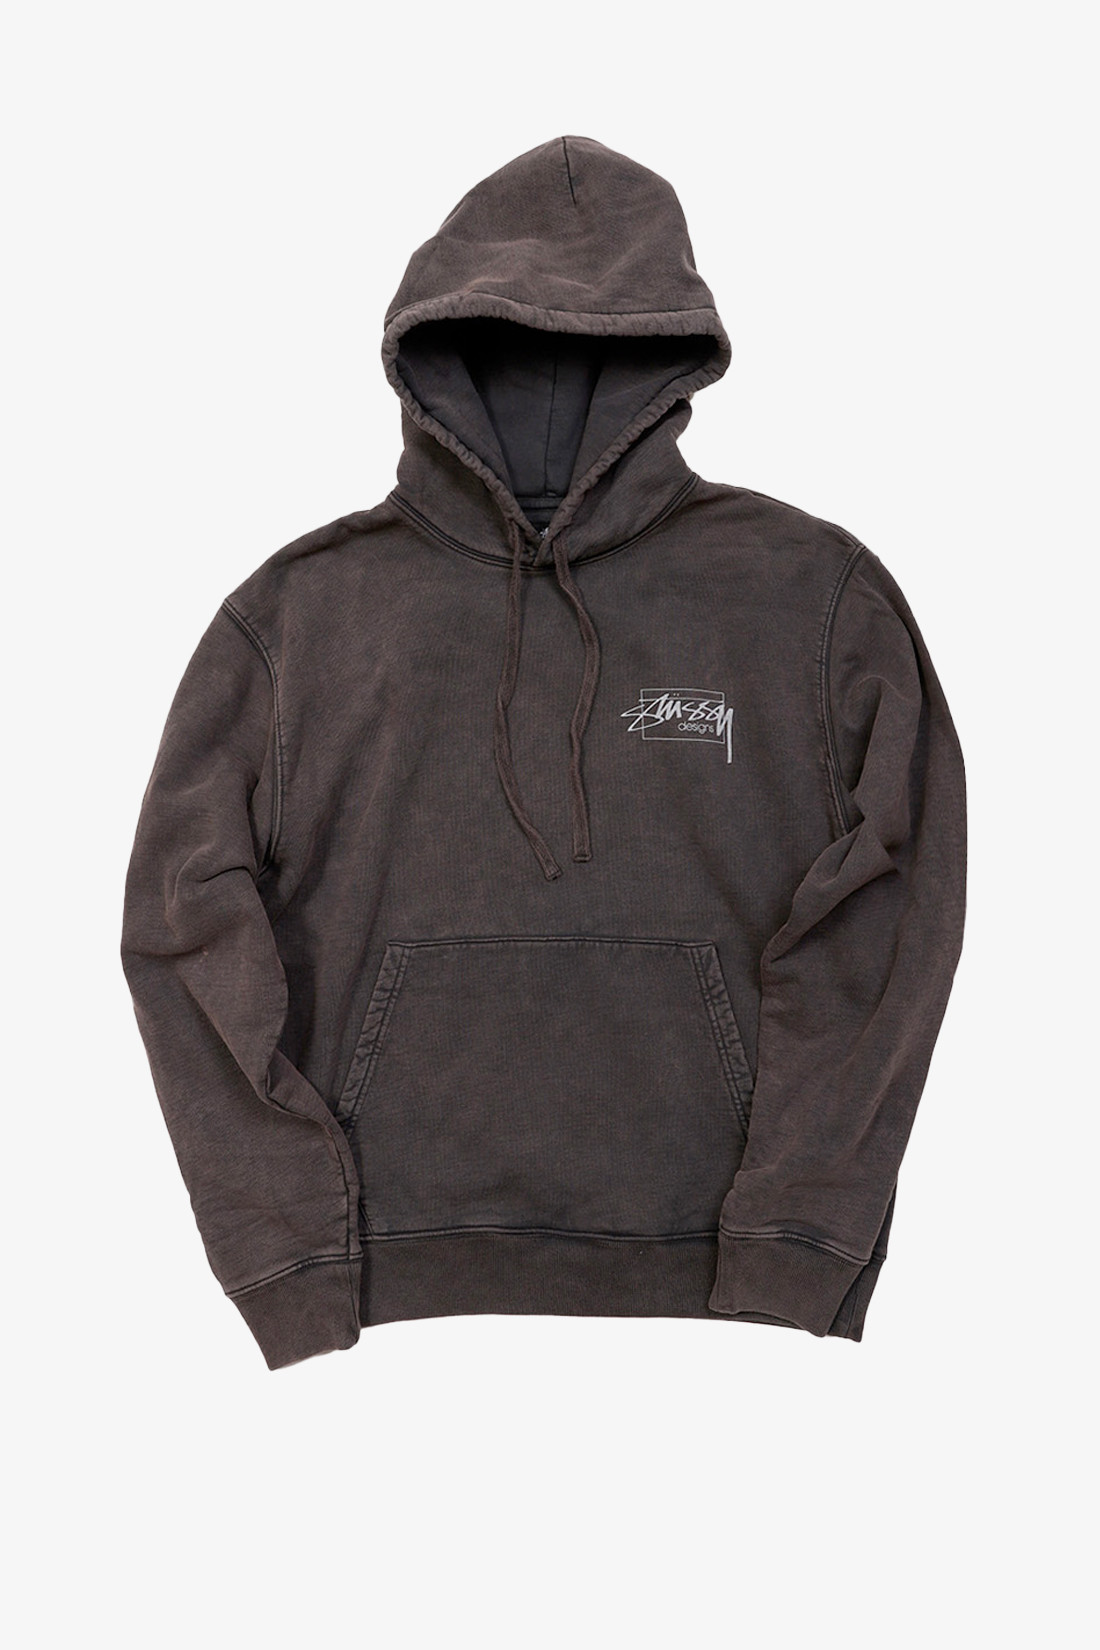 STUSSY - Streetwear Clothing and Accessories, FW21 Collection